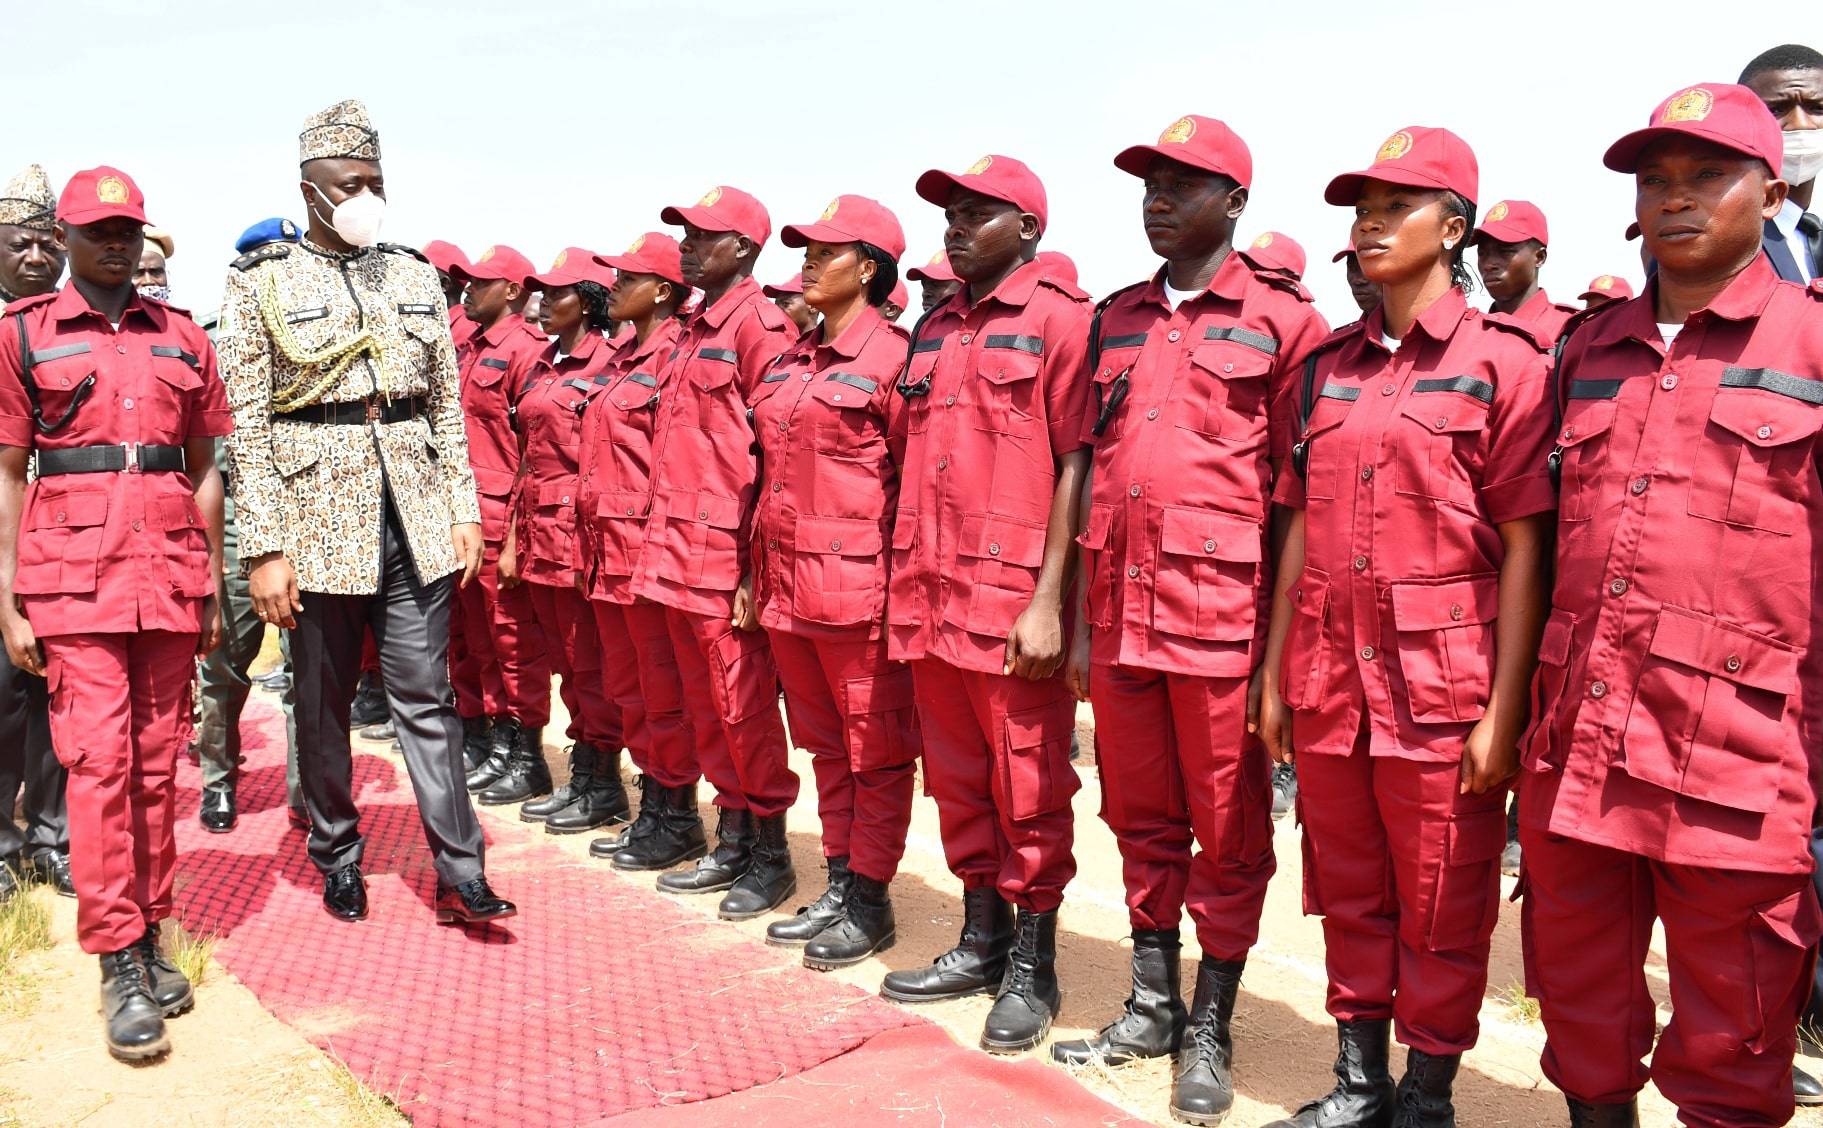 Oyo State Governor, Engr. Seyi Makinde (second right), inspecting the pioneer Corps of the Oyo State Security Network Agency (Amotekun Corps), during their passing-out ceremony held at the Emmanuel Alayande College of Education, Oyo. PHOTO: Oyo State Government